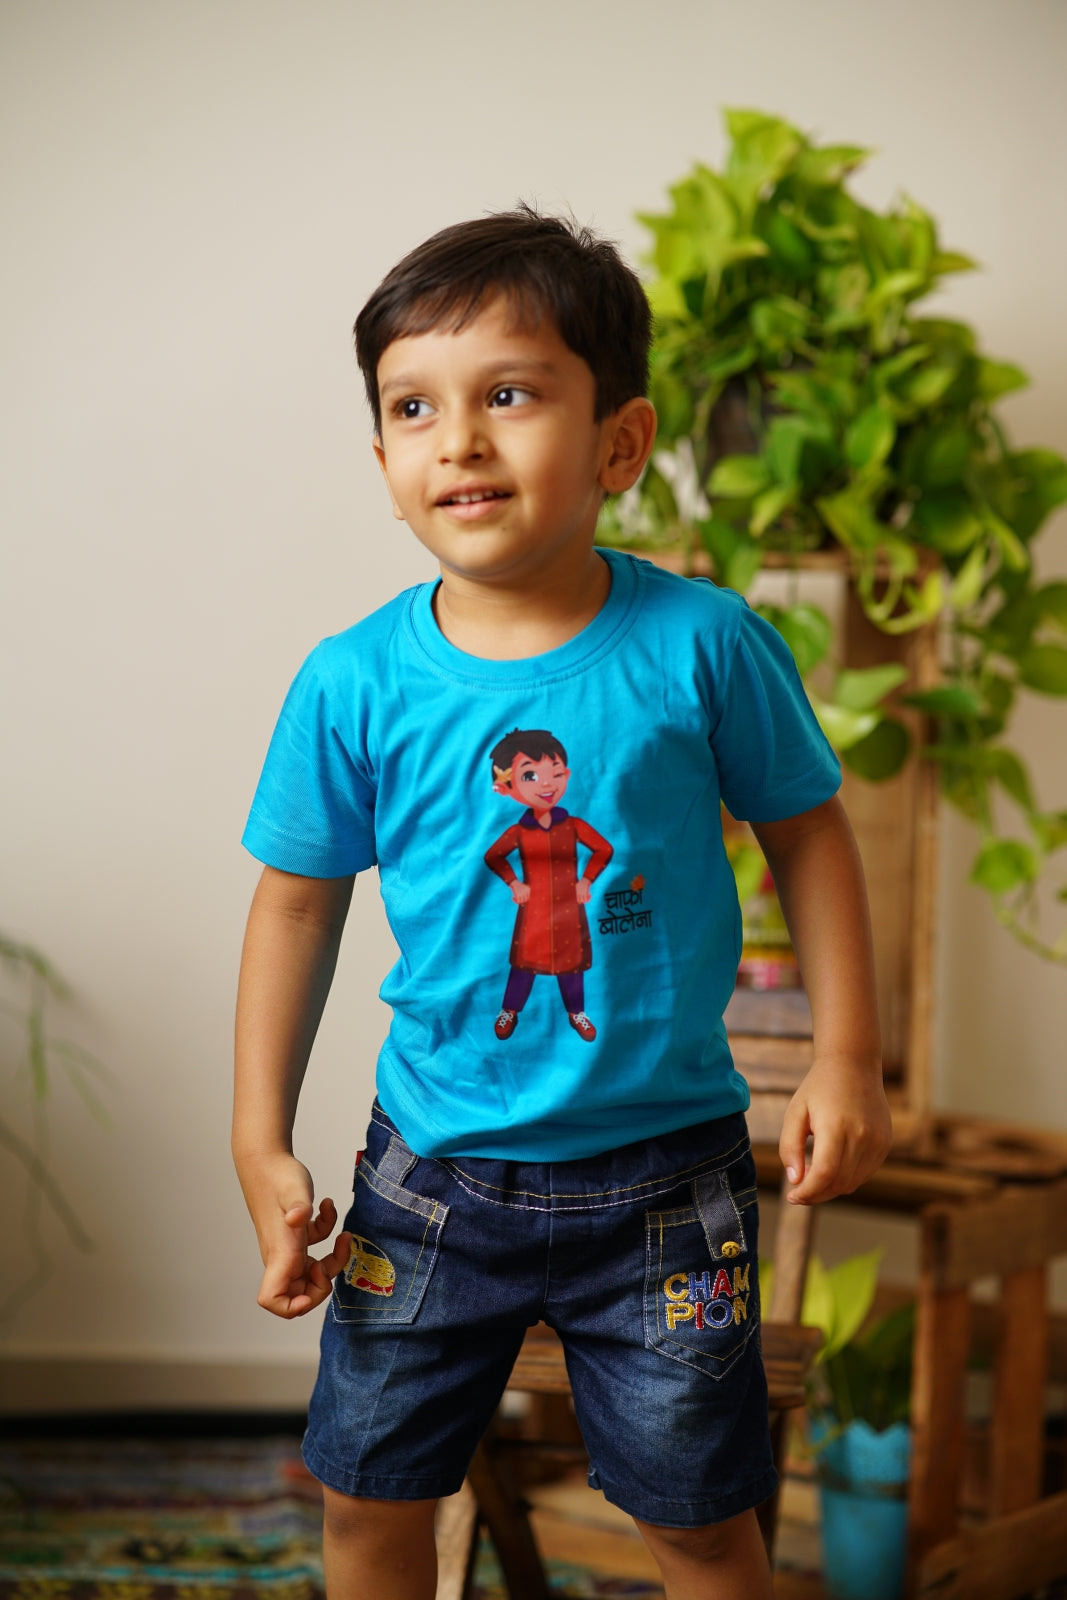 Chafa - Blue colored pure cotton round neck t-shirt with a cheerful print and Marathi poetic quote for Boy T-shirt specifications: 180 GSM 100% combed cotton bio wash traditional ethnic brocade printed silk cotton kurta pyjama salwar suit pajama churidar set sherwani jacket for baby boy kids  shirt floral essential